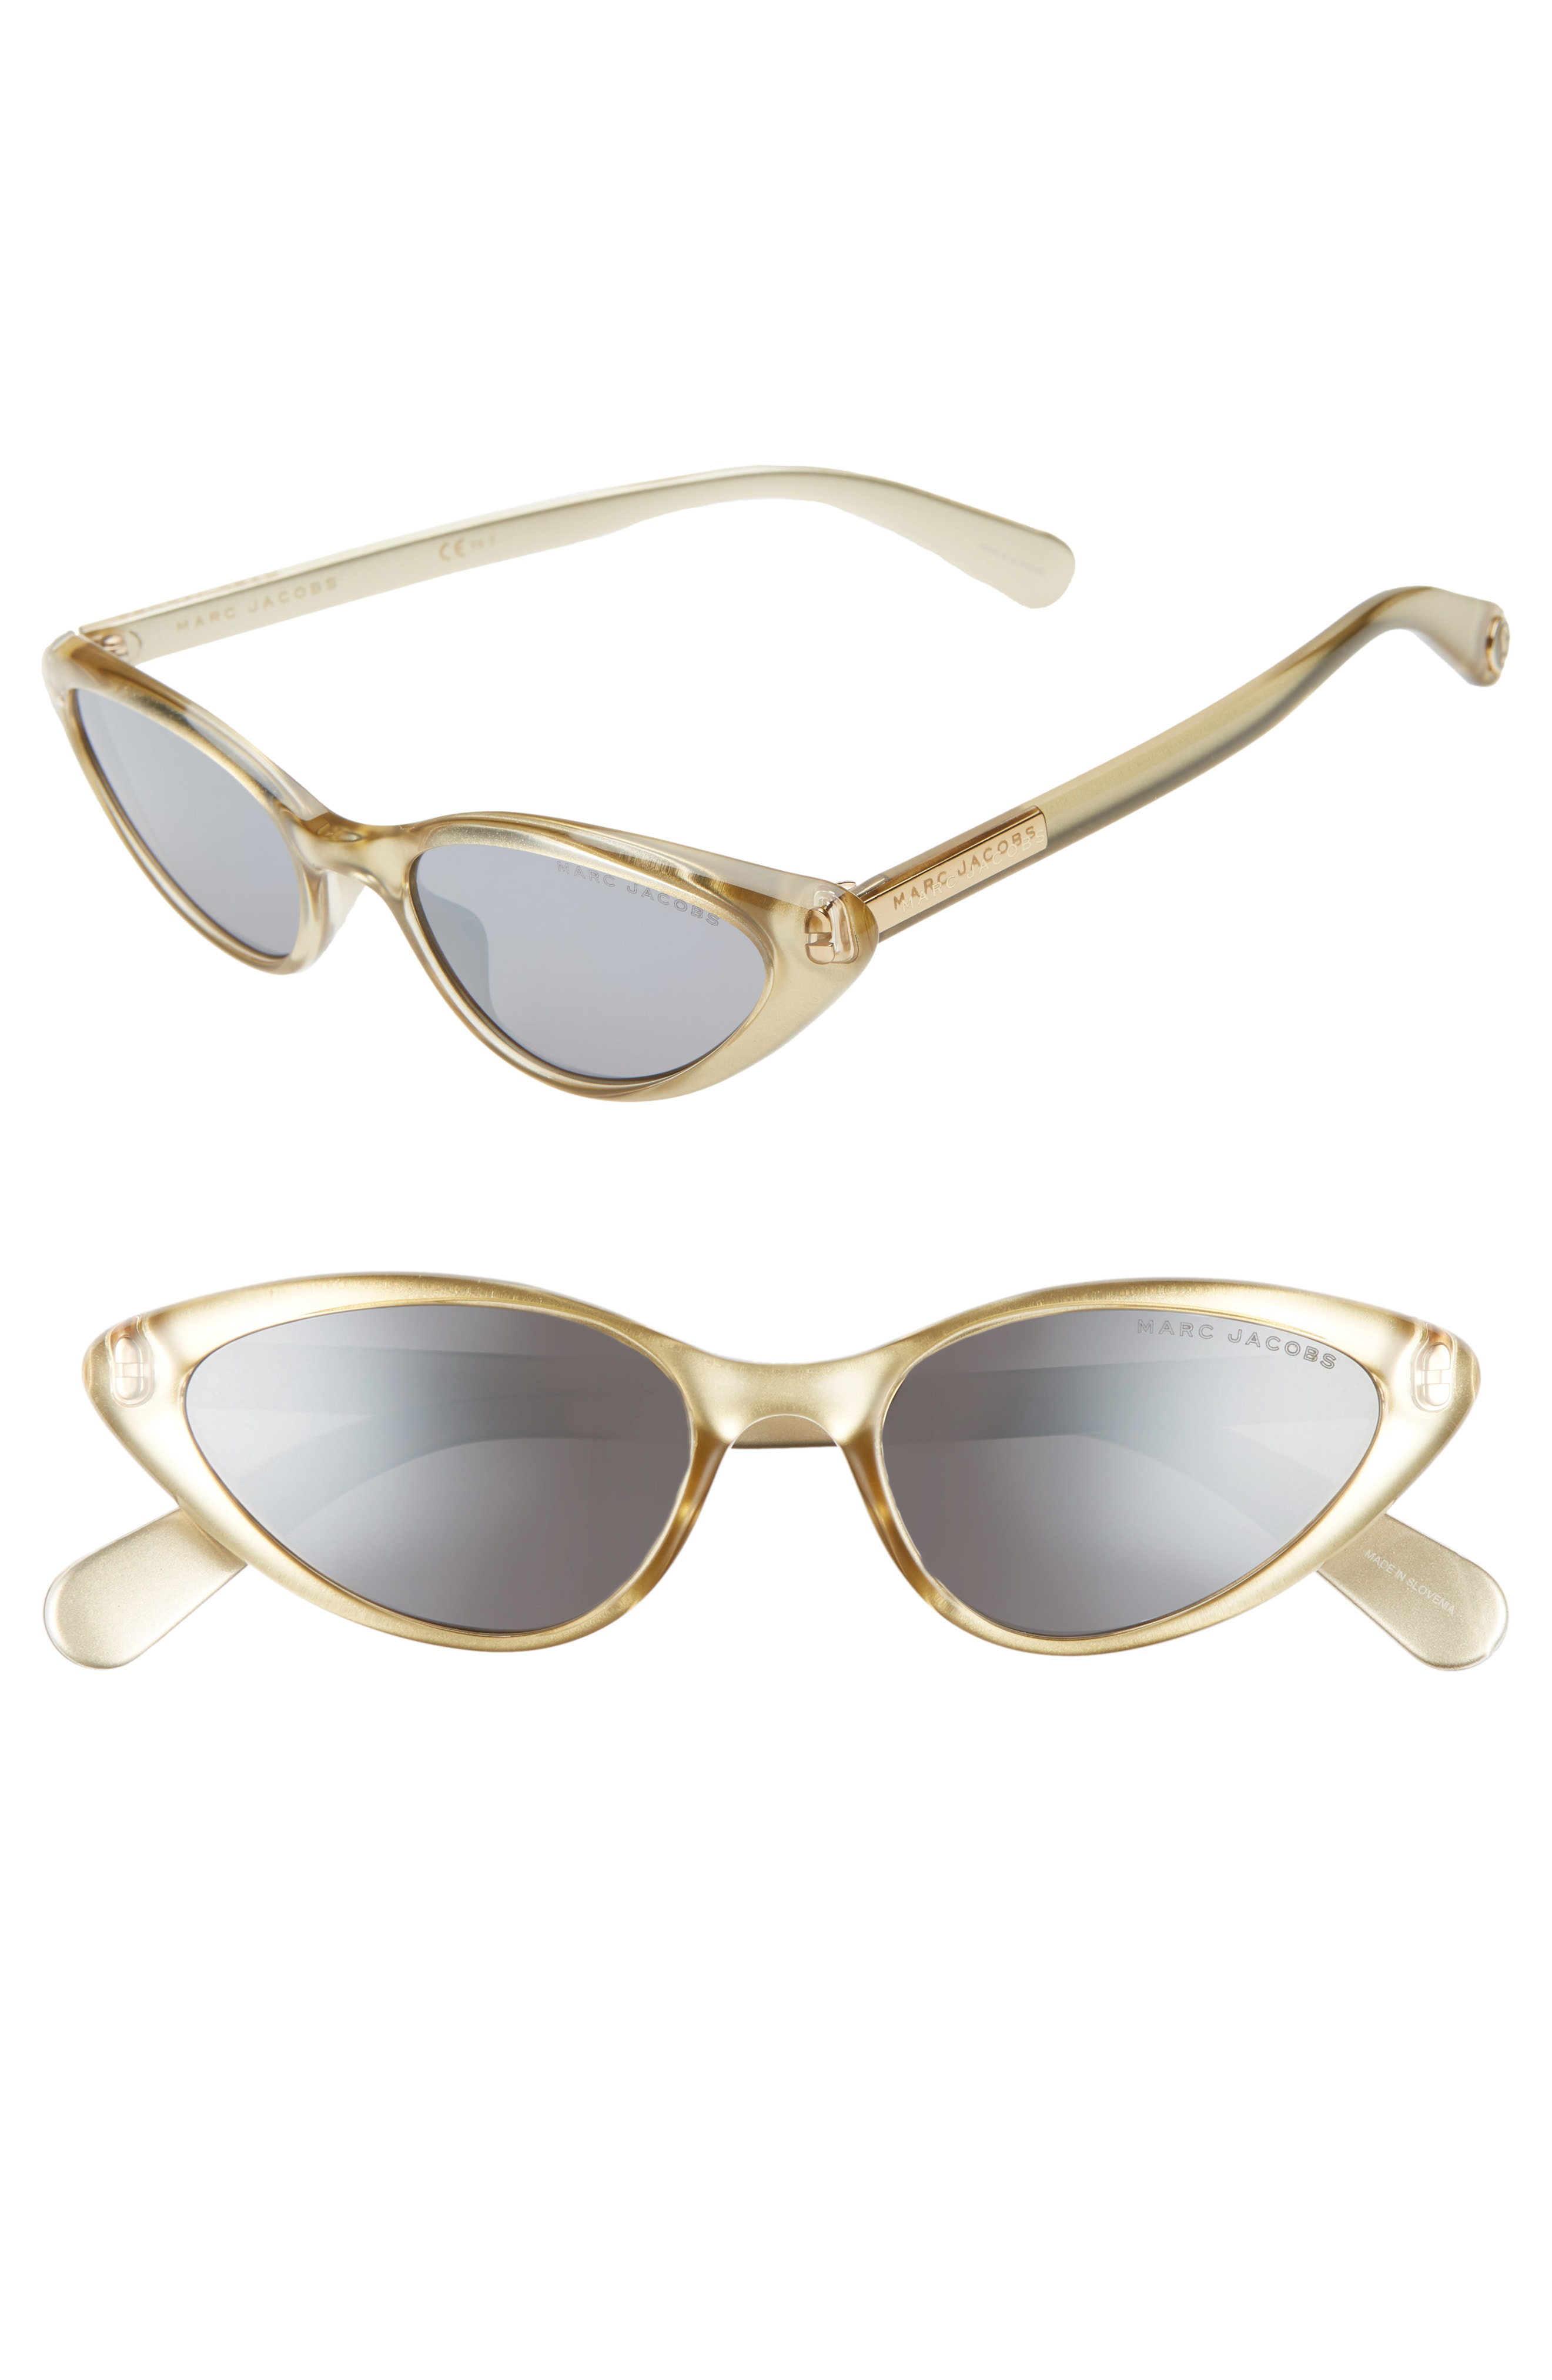 marc jacobs 52mm cat eye sunglasses for Sale OFF 77%